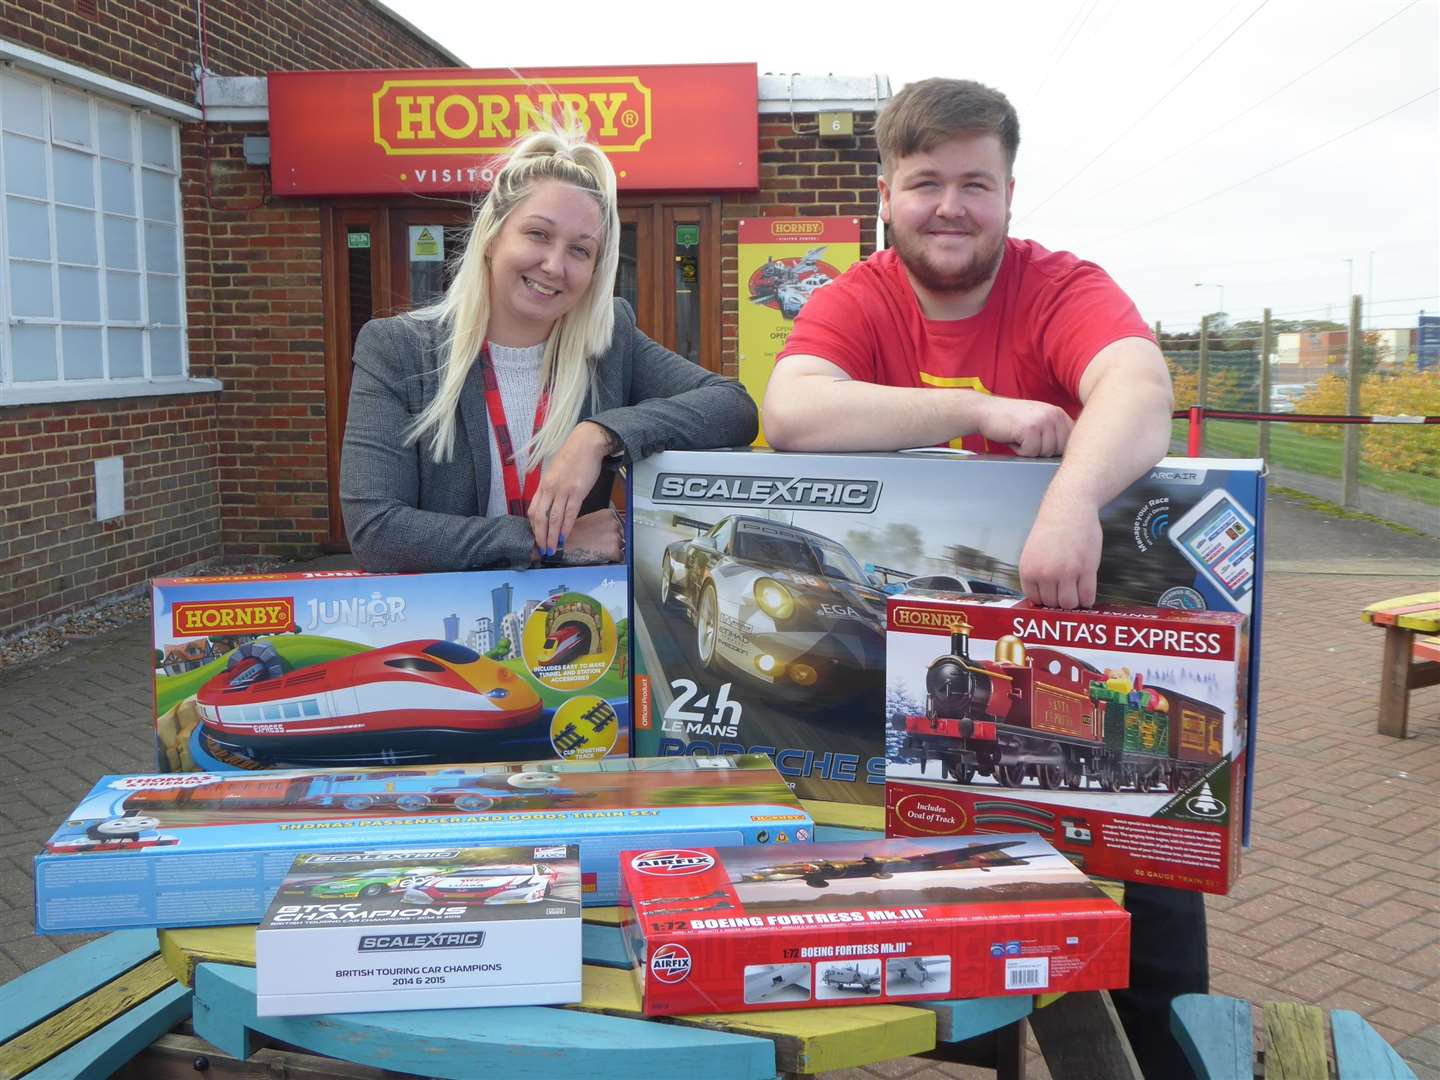 Conditions of Use: Slug: TE Hornby17 021017 Caption: Ami Dennis-Stirrups and Adam Waller of Hornby with prize donations to support the KM Charity Team in 2018. Location: Thanet Category: Charity Byline: Simon Dolby, KM Charity Team Uploaded By: Liz NICHOLLS Copyright: Unknown Original Caption: FM4945191 (974856)